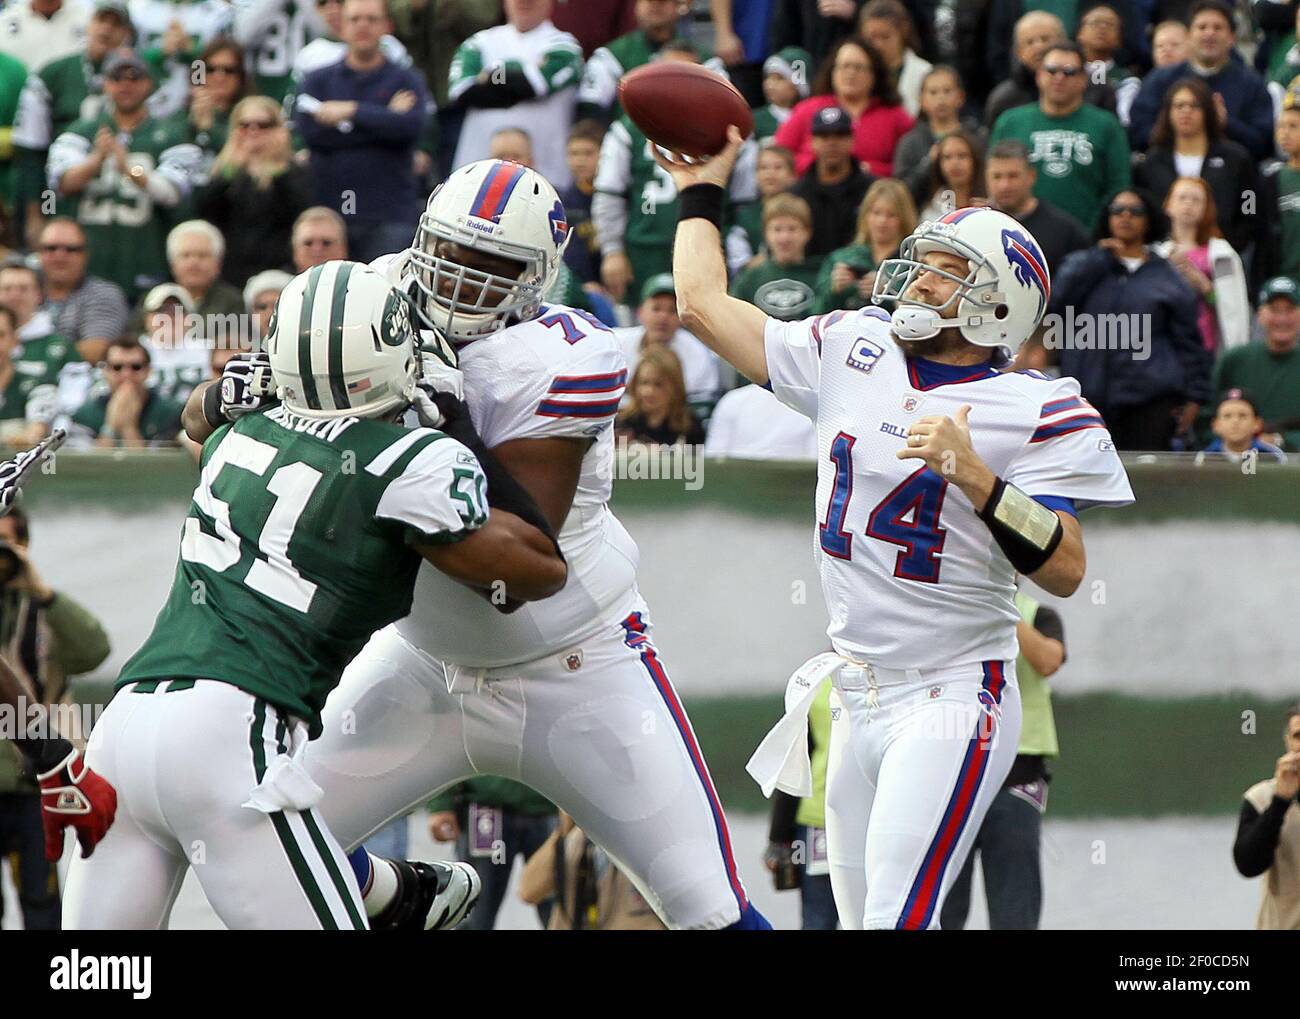 Ryan Fitzpatrick of the Buffalo Bills throws a pass against the New York  Jets at MetLife Stadium on Sunday, November 27 2011, in East Rutherford,  New Jersey. (Photo by Jim McIsaac/Newsday/MCT/Sipa USA